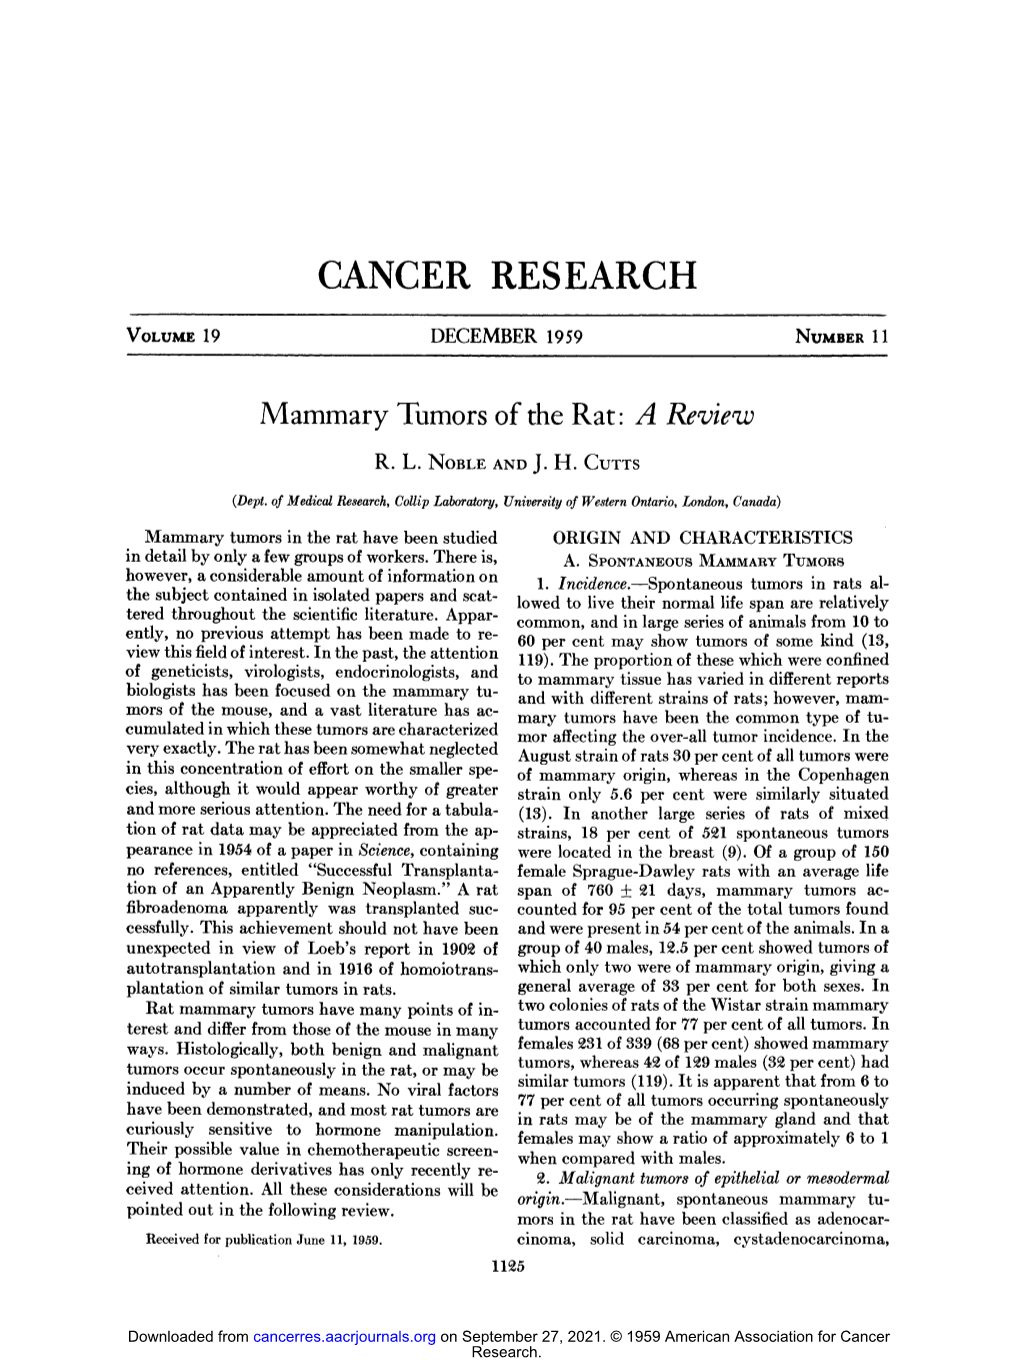 Mammary Tumors of the Rat" a Review